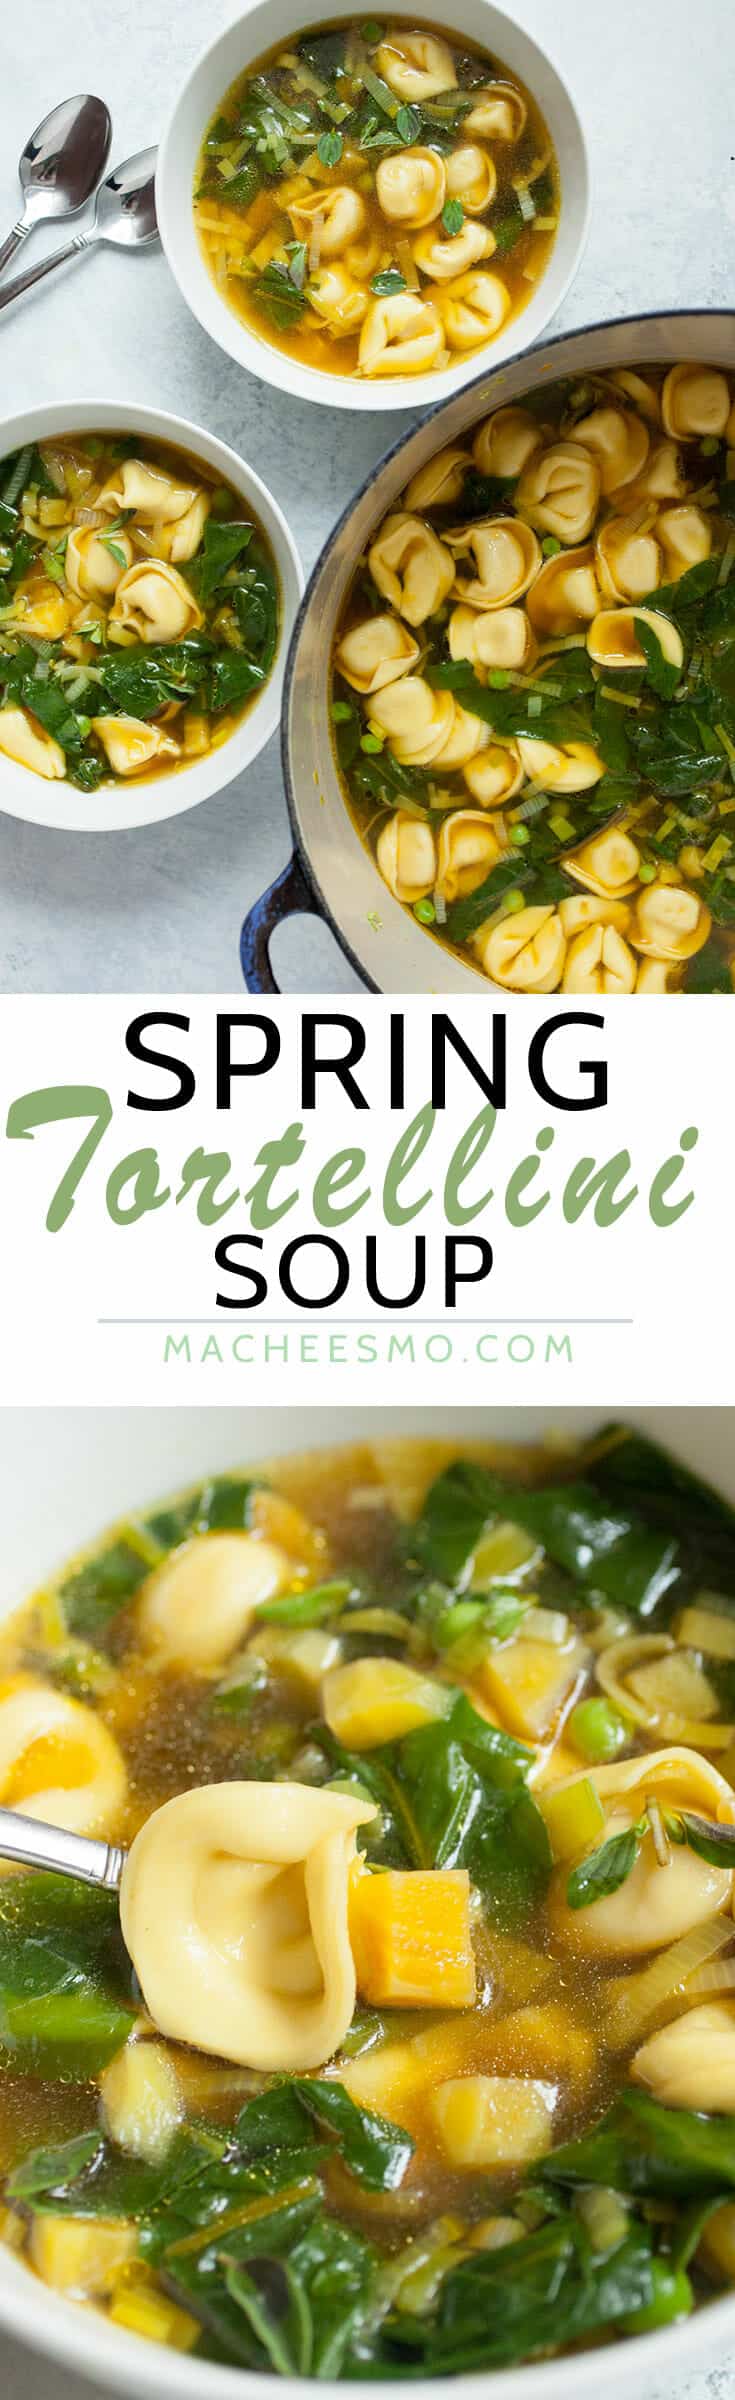 Spring Tortellini Soup: This is a really easy soup to toss together. It's filled with fresh spring veggies and tortellini. Ready in about 30 minutes! | macheesmo.com